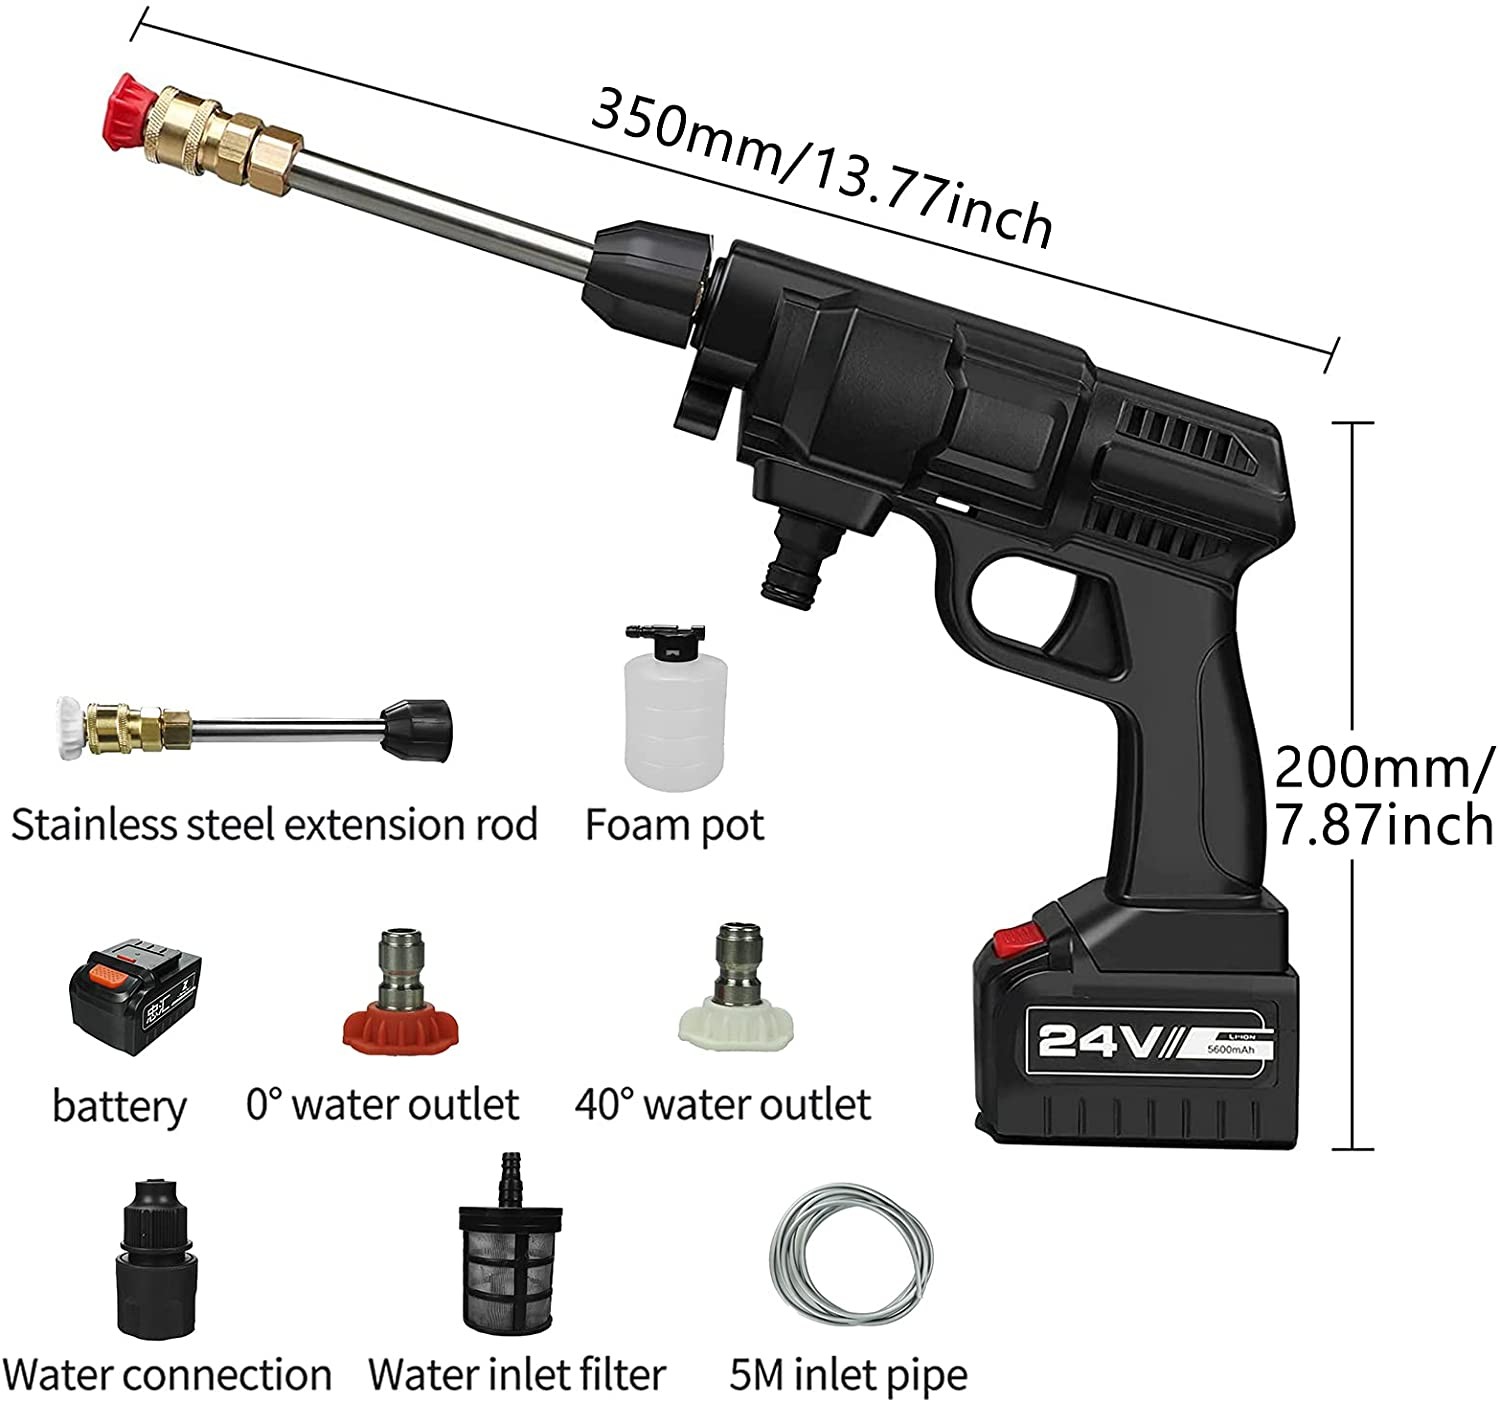 Cordless Pressure Washer, 5600mAh 200W Max 435PSI Portable Power Washer Cleaner Battery Powered High Pressure Car Wash Watering Device